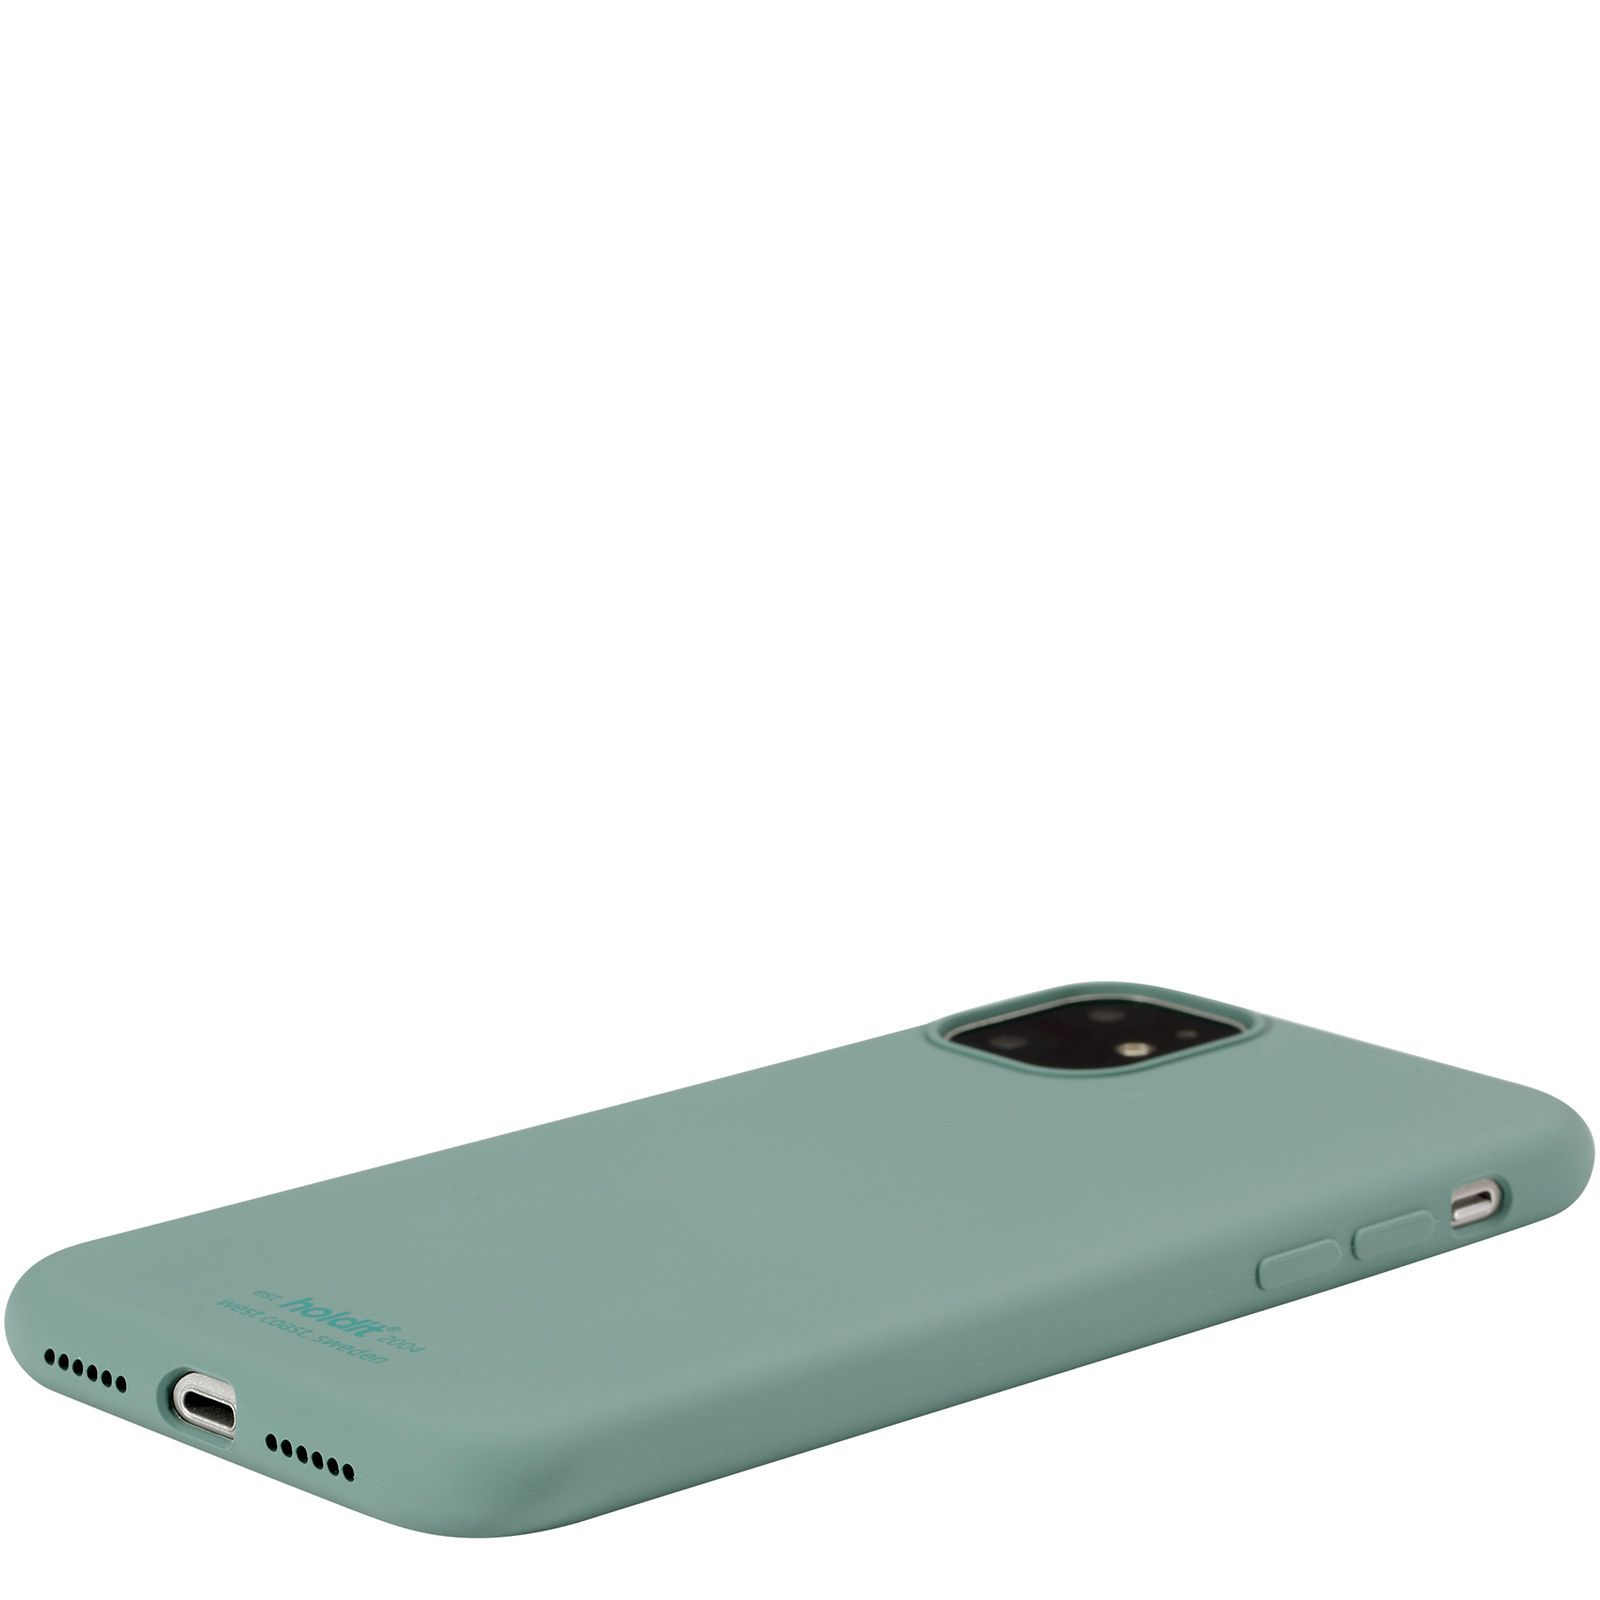  Гръб Holdit за iPhone 11, XR, Silicone Case, Moss Green